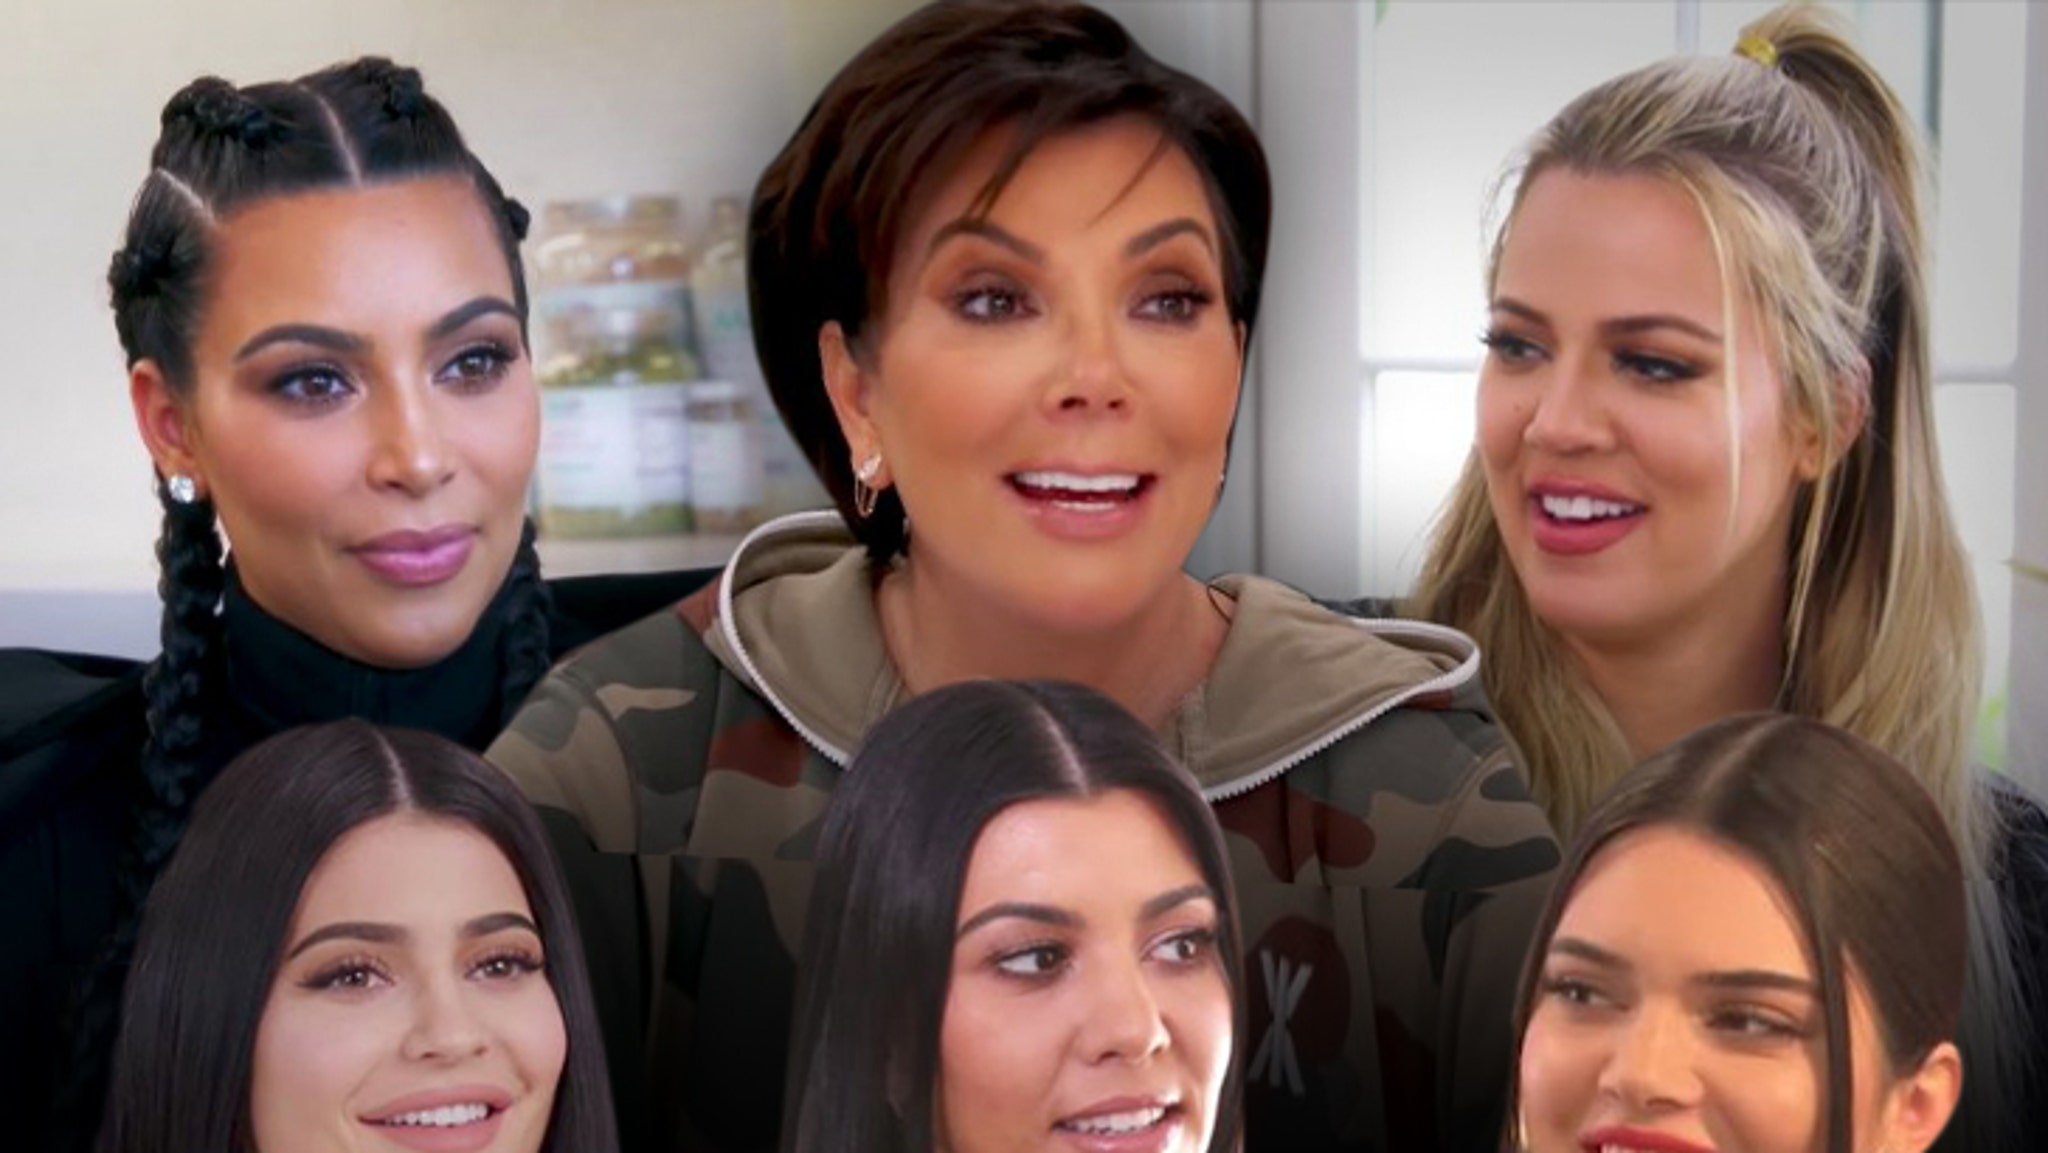 Kardashians Re-sign with E! Network for $150 MILLION